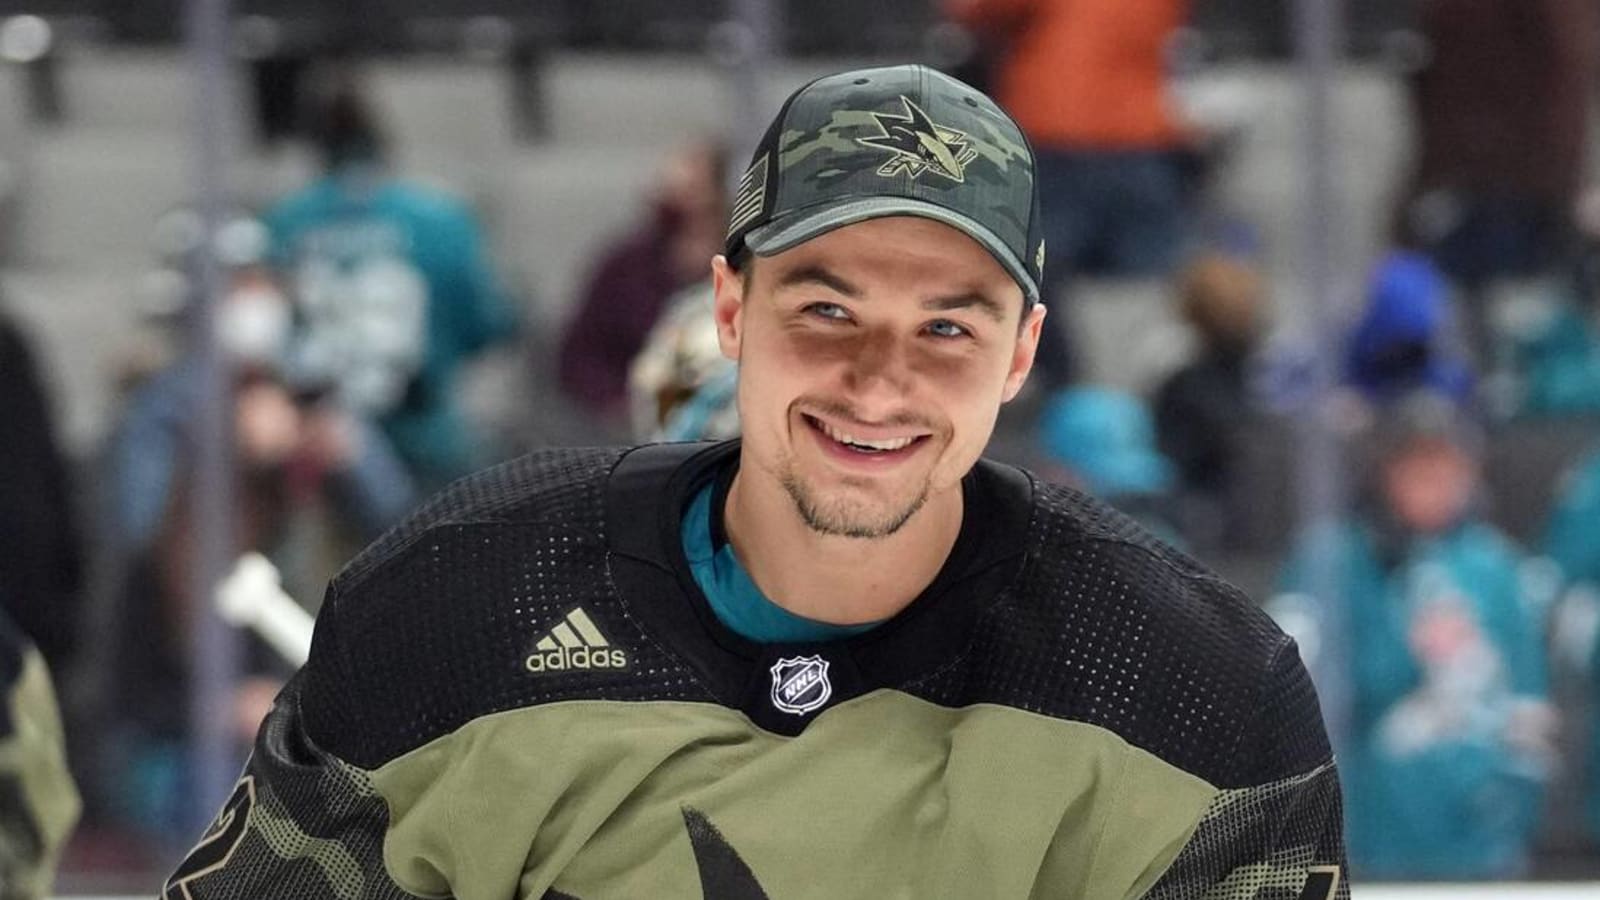 Sharks winger Kevin Labanc has reportedly fully recovered from shoulder injury